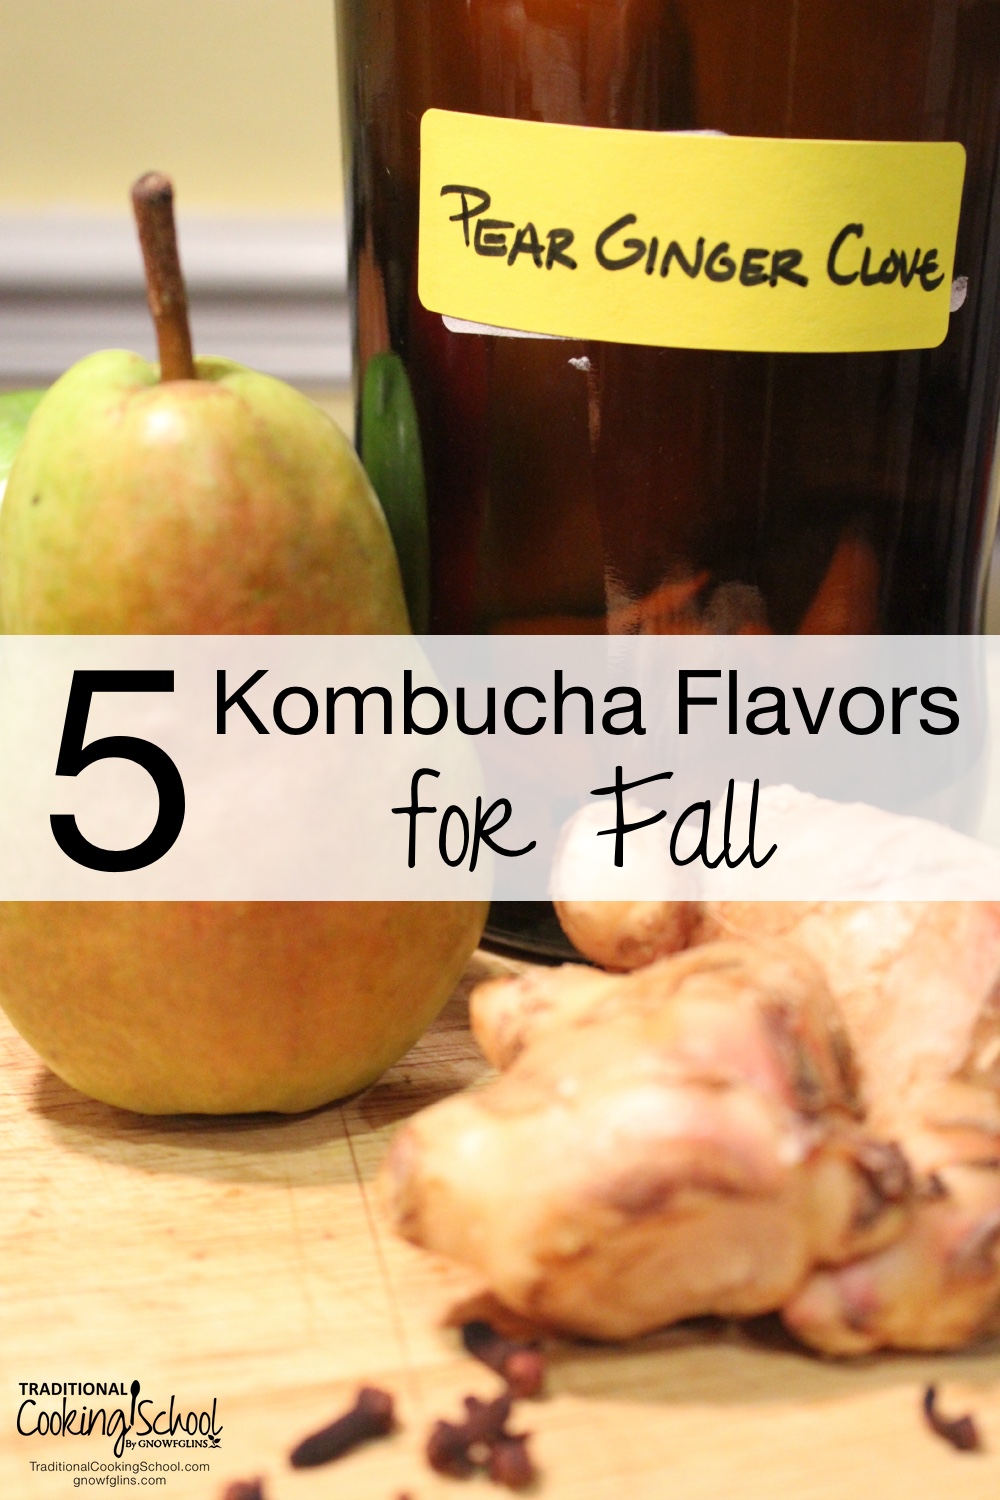 5 Kombucha Flavors for Fall | Kombucha can be expensive to purchase, but it costs just pennies to make at home! Once you get the hang of it, it's time to experiment with flavorings. Here are 5 fun spiced and fruit flavorings for Fall. | TraditionalCookingSchool.com